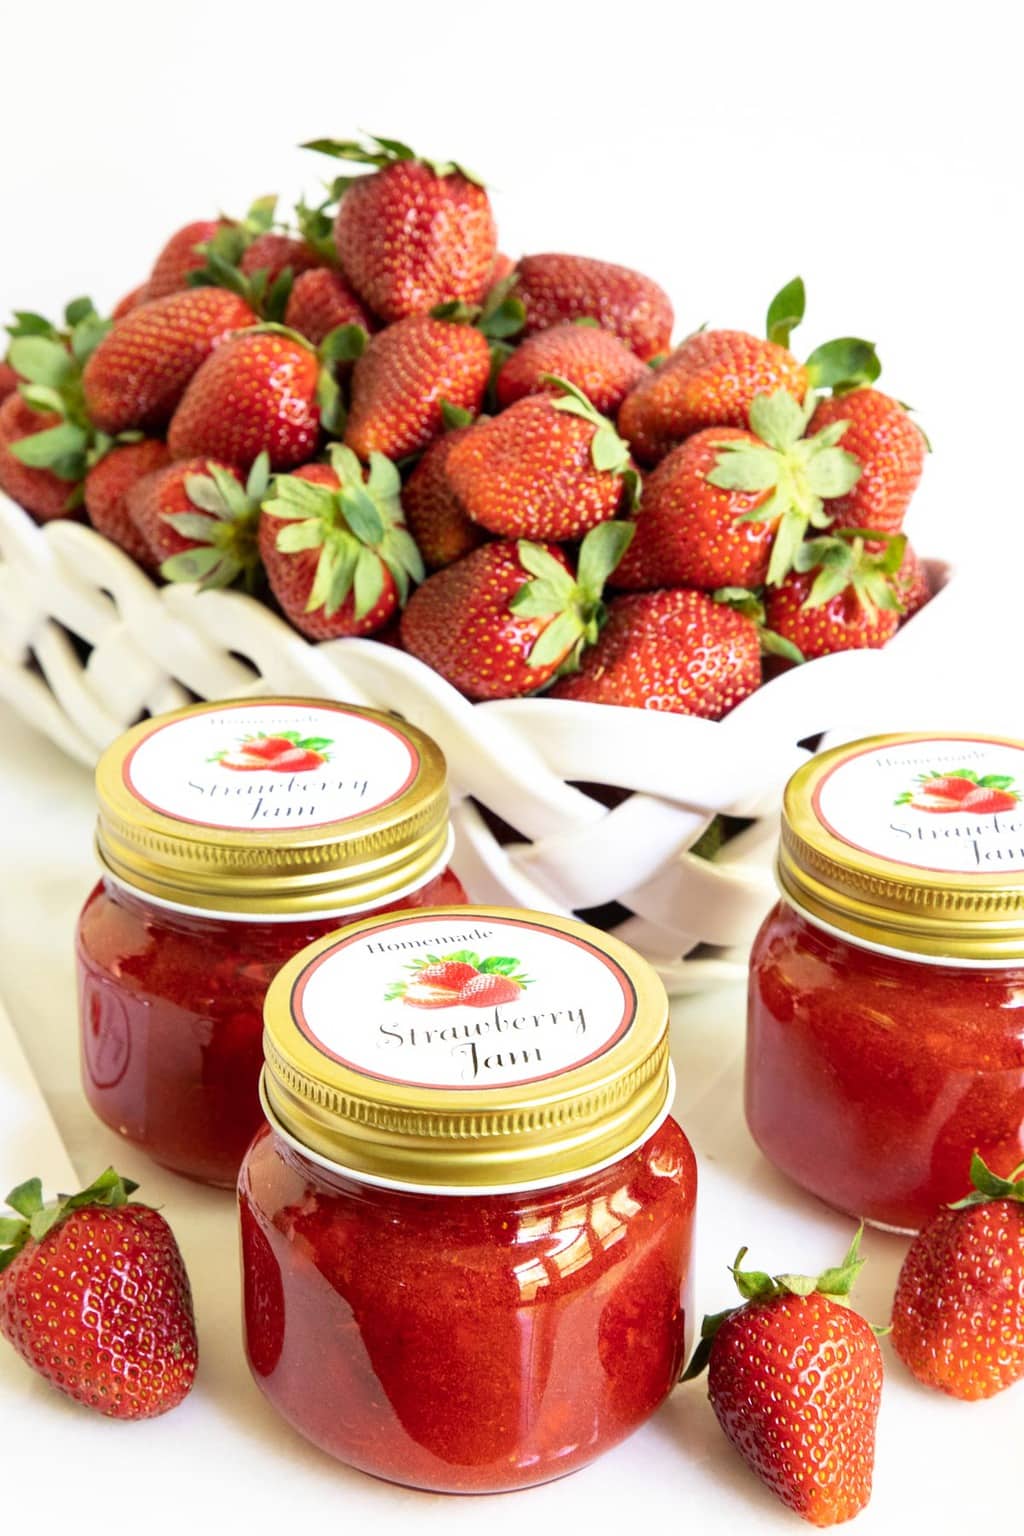 Vertical photo of jars of Strawberry Freezer Jam with custom label for gift giving with a white porcelain basket of fresh strawberries in the background.